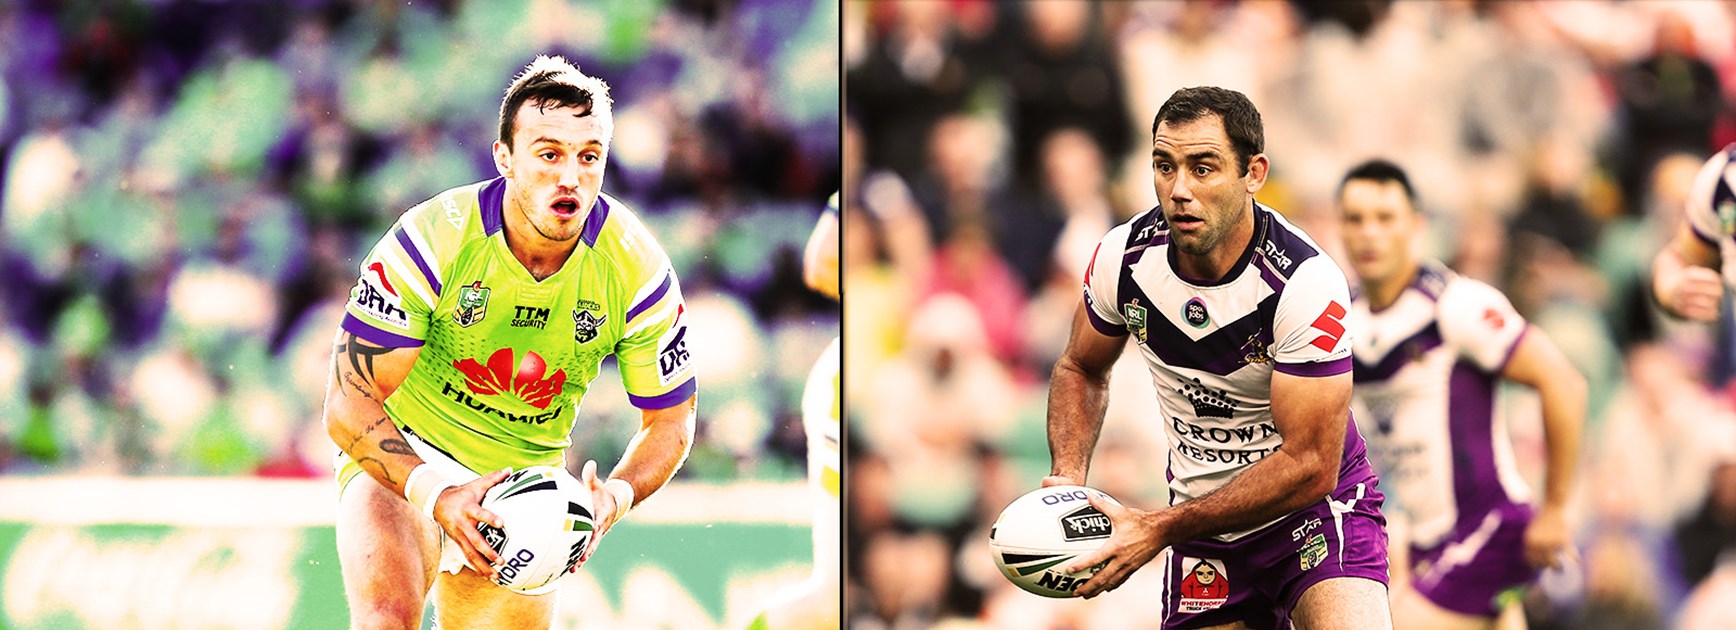 The Raiders clash with the Storm promises to be one of the games of the season.